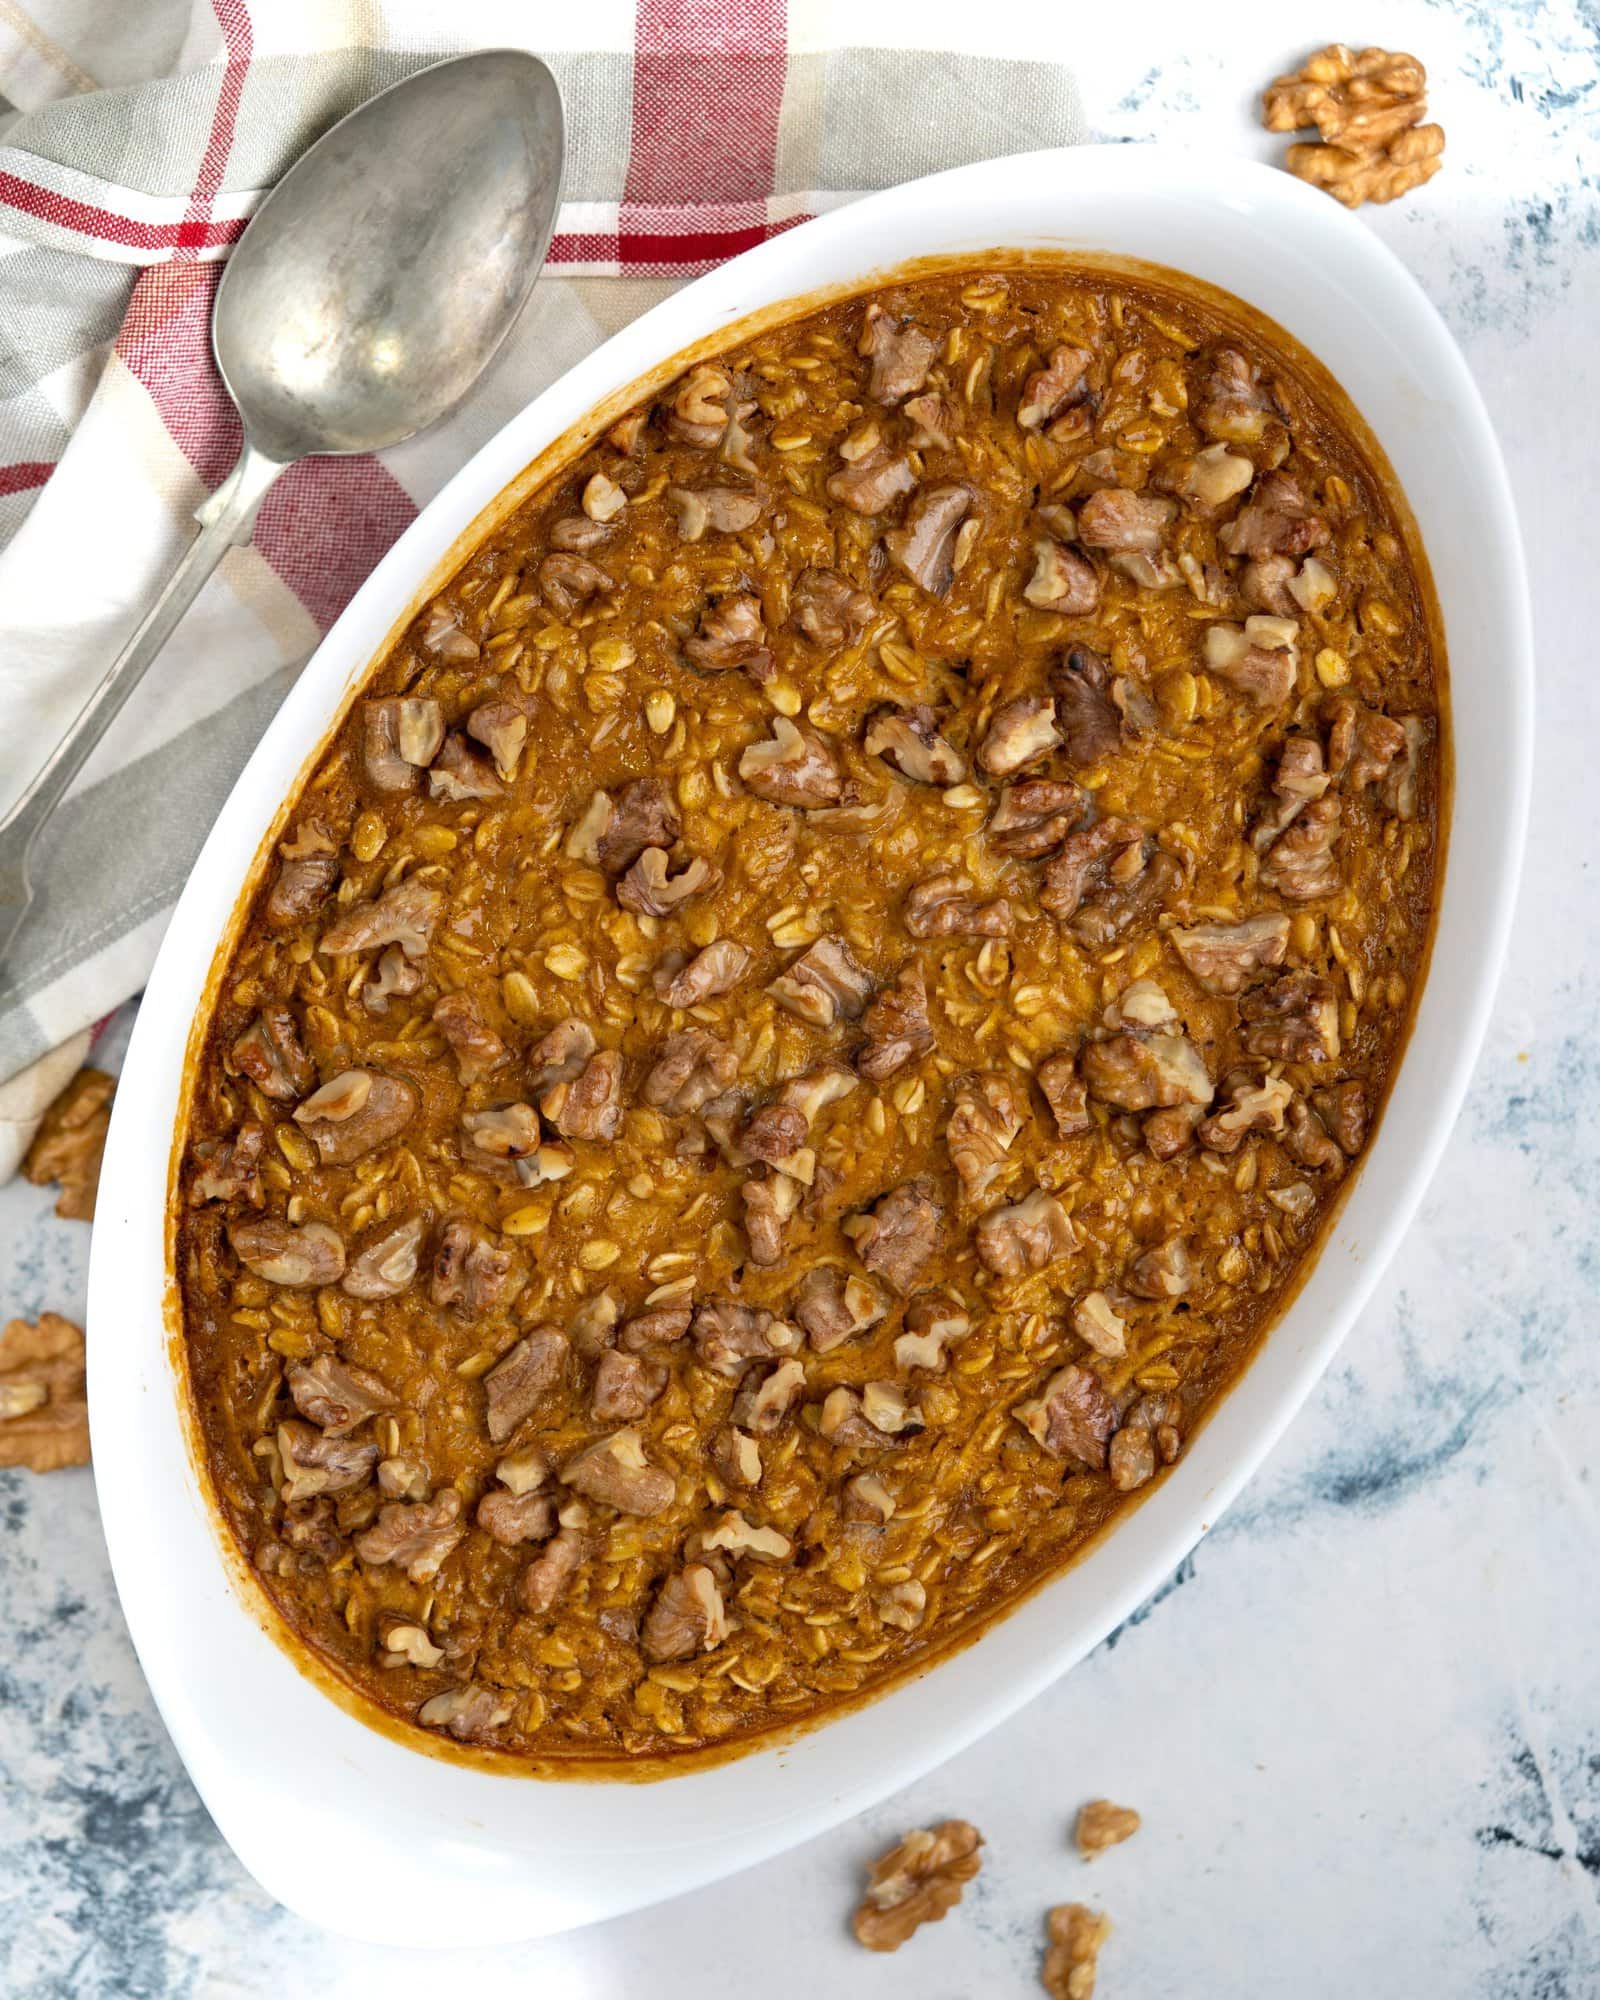 Top view of Baked pumpkin oatmeal in a casserole topped with walnut chunks.